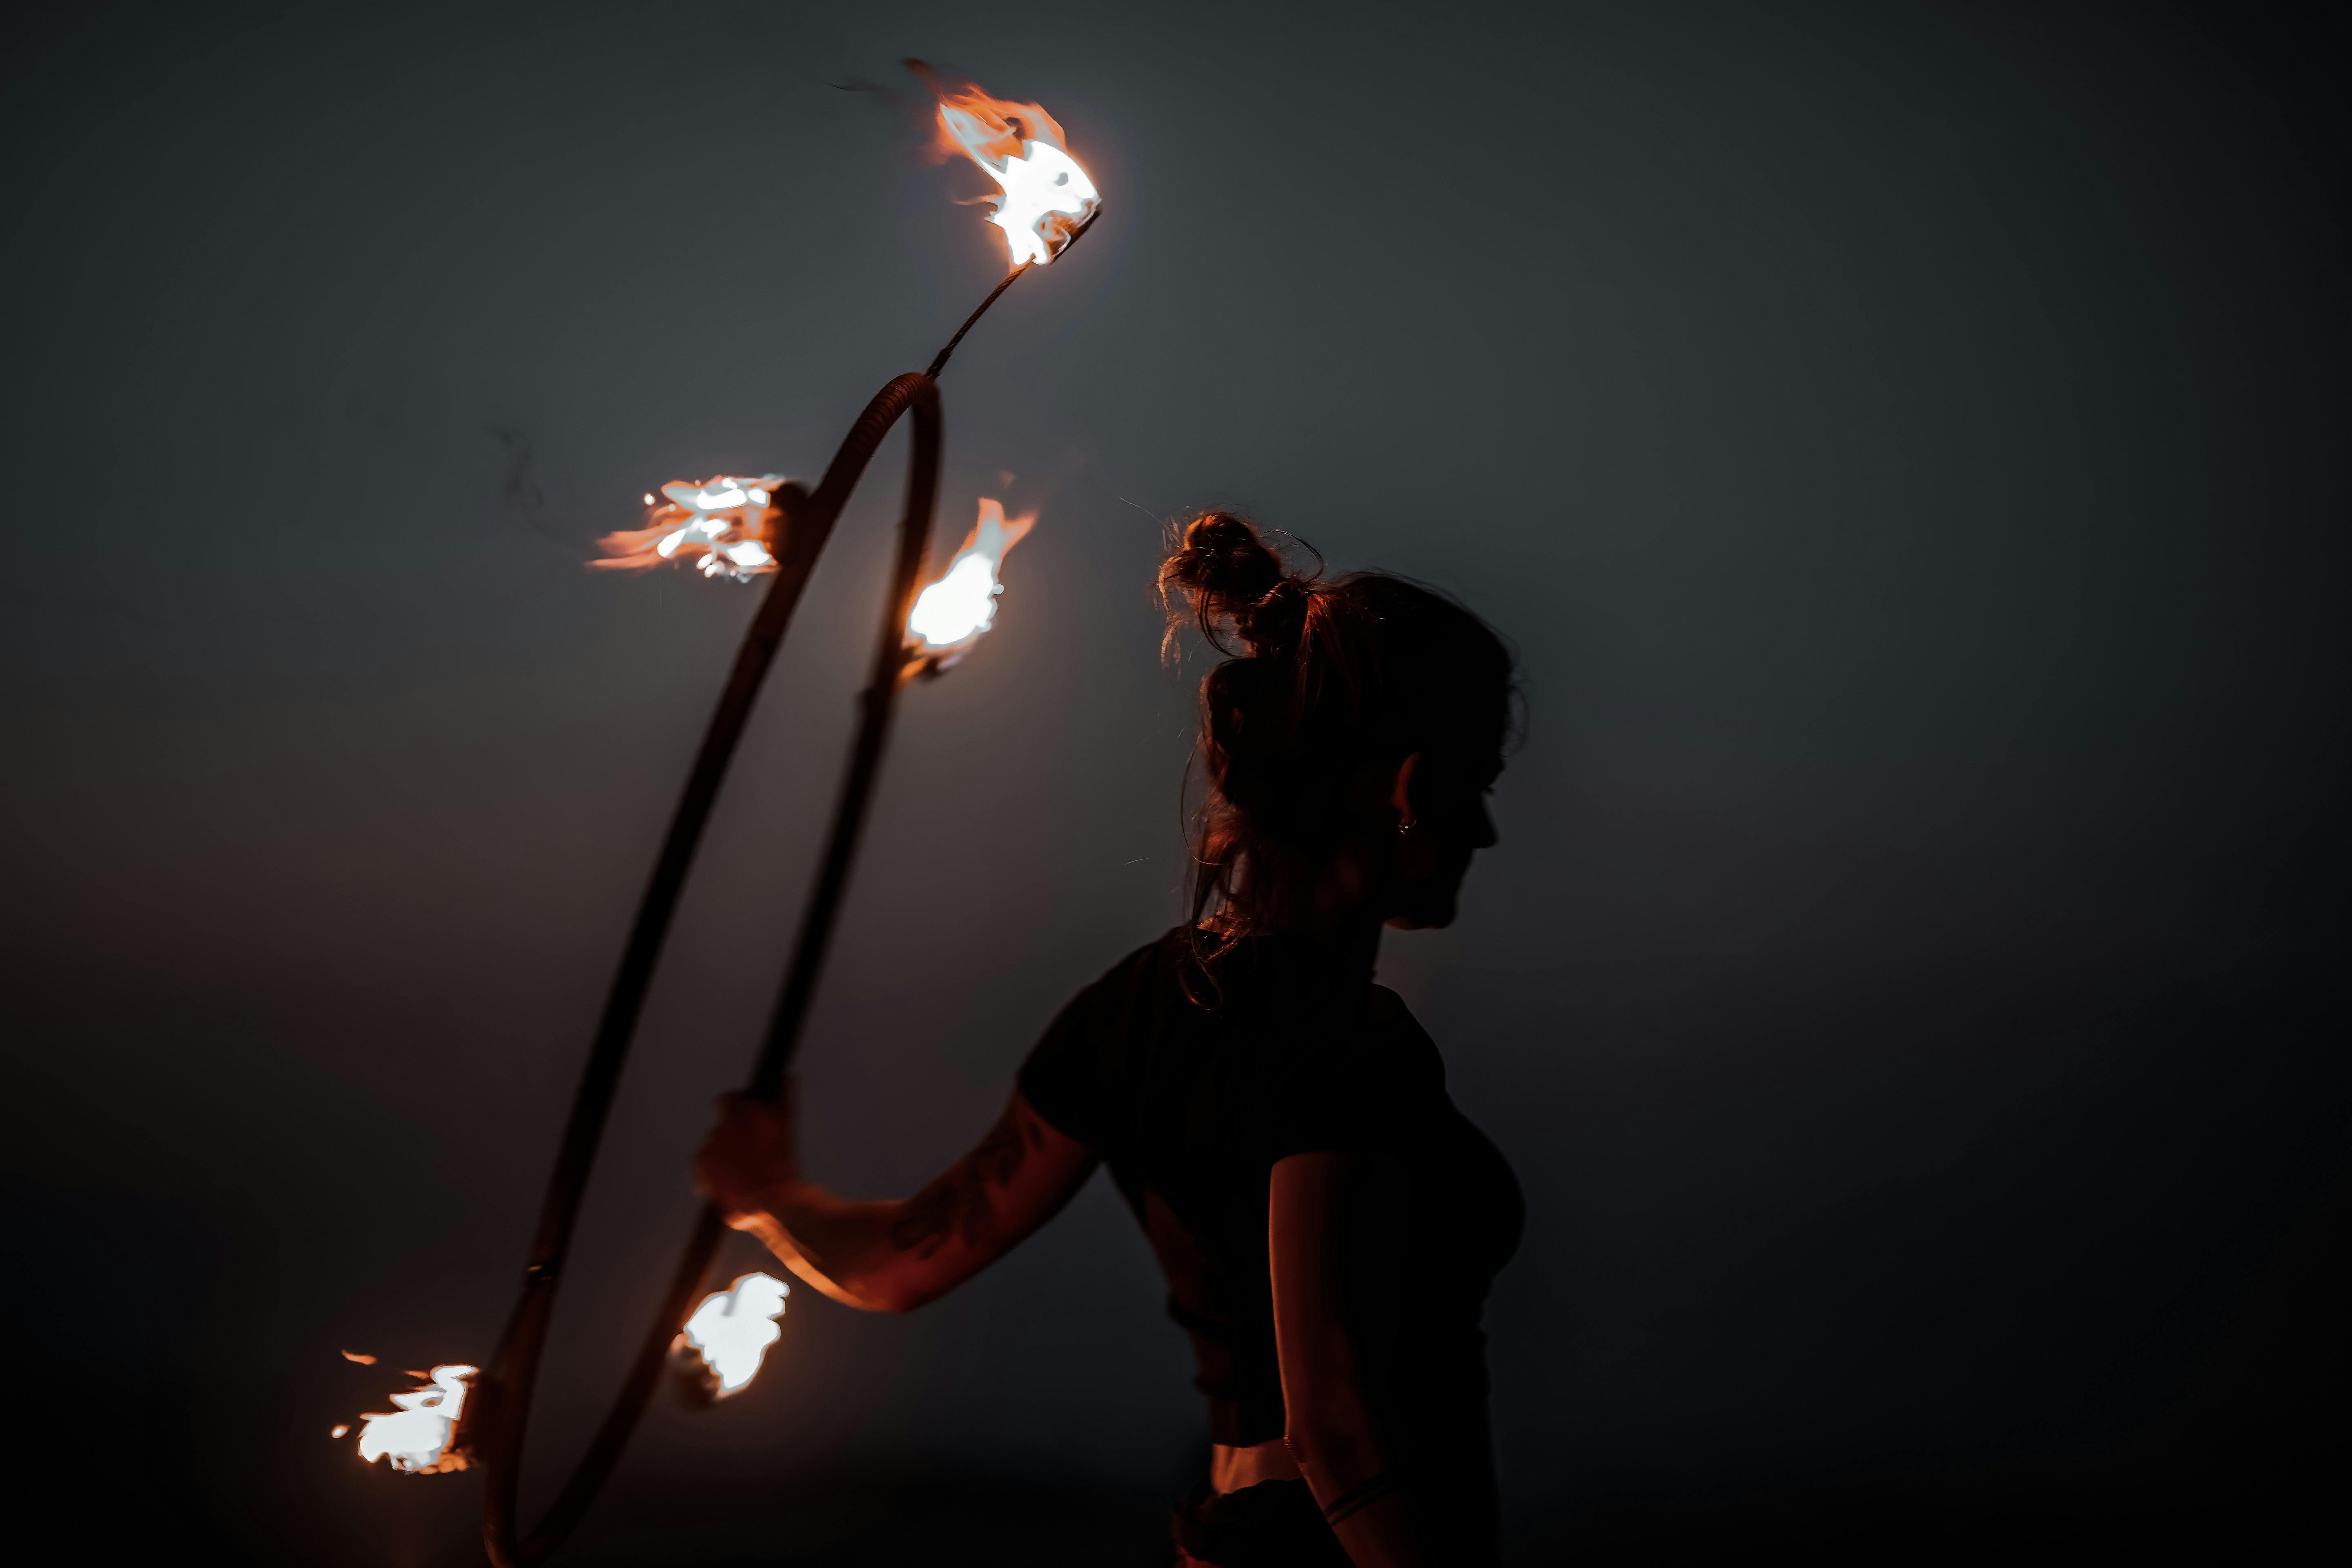 Dancer With Hula Hoop On Fire · Free Stock Photo